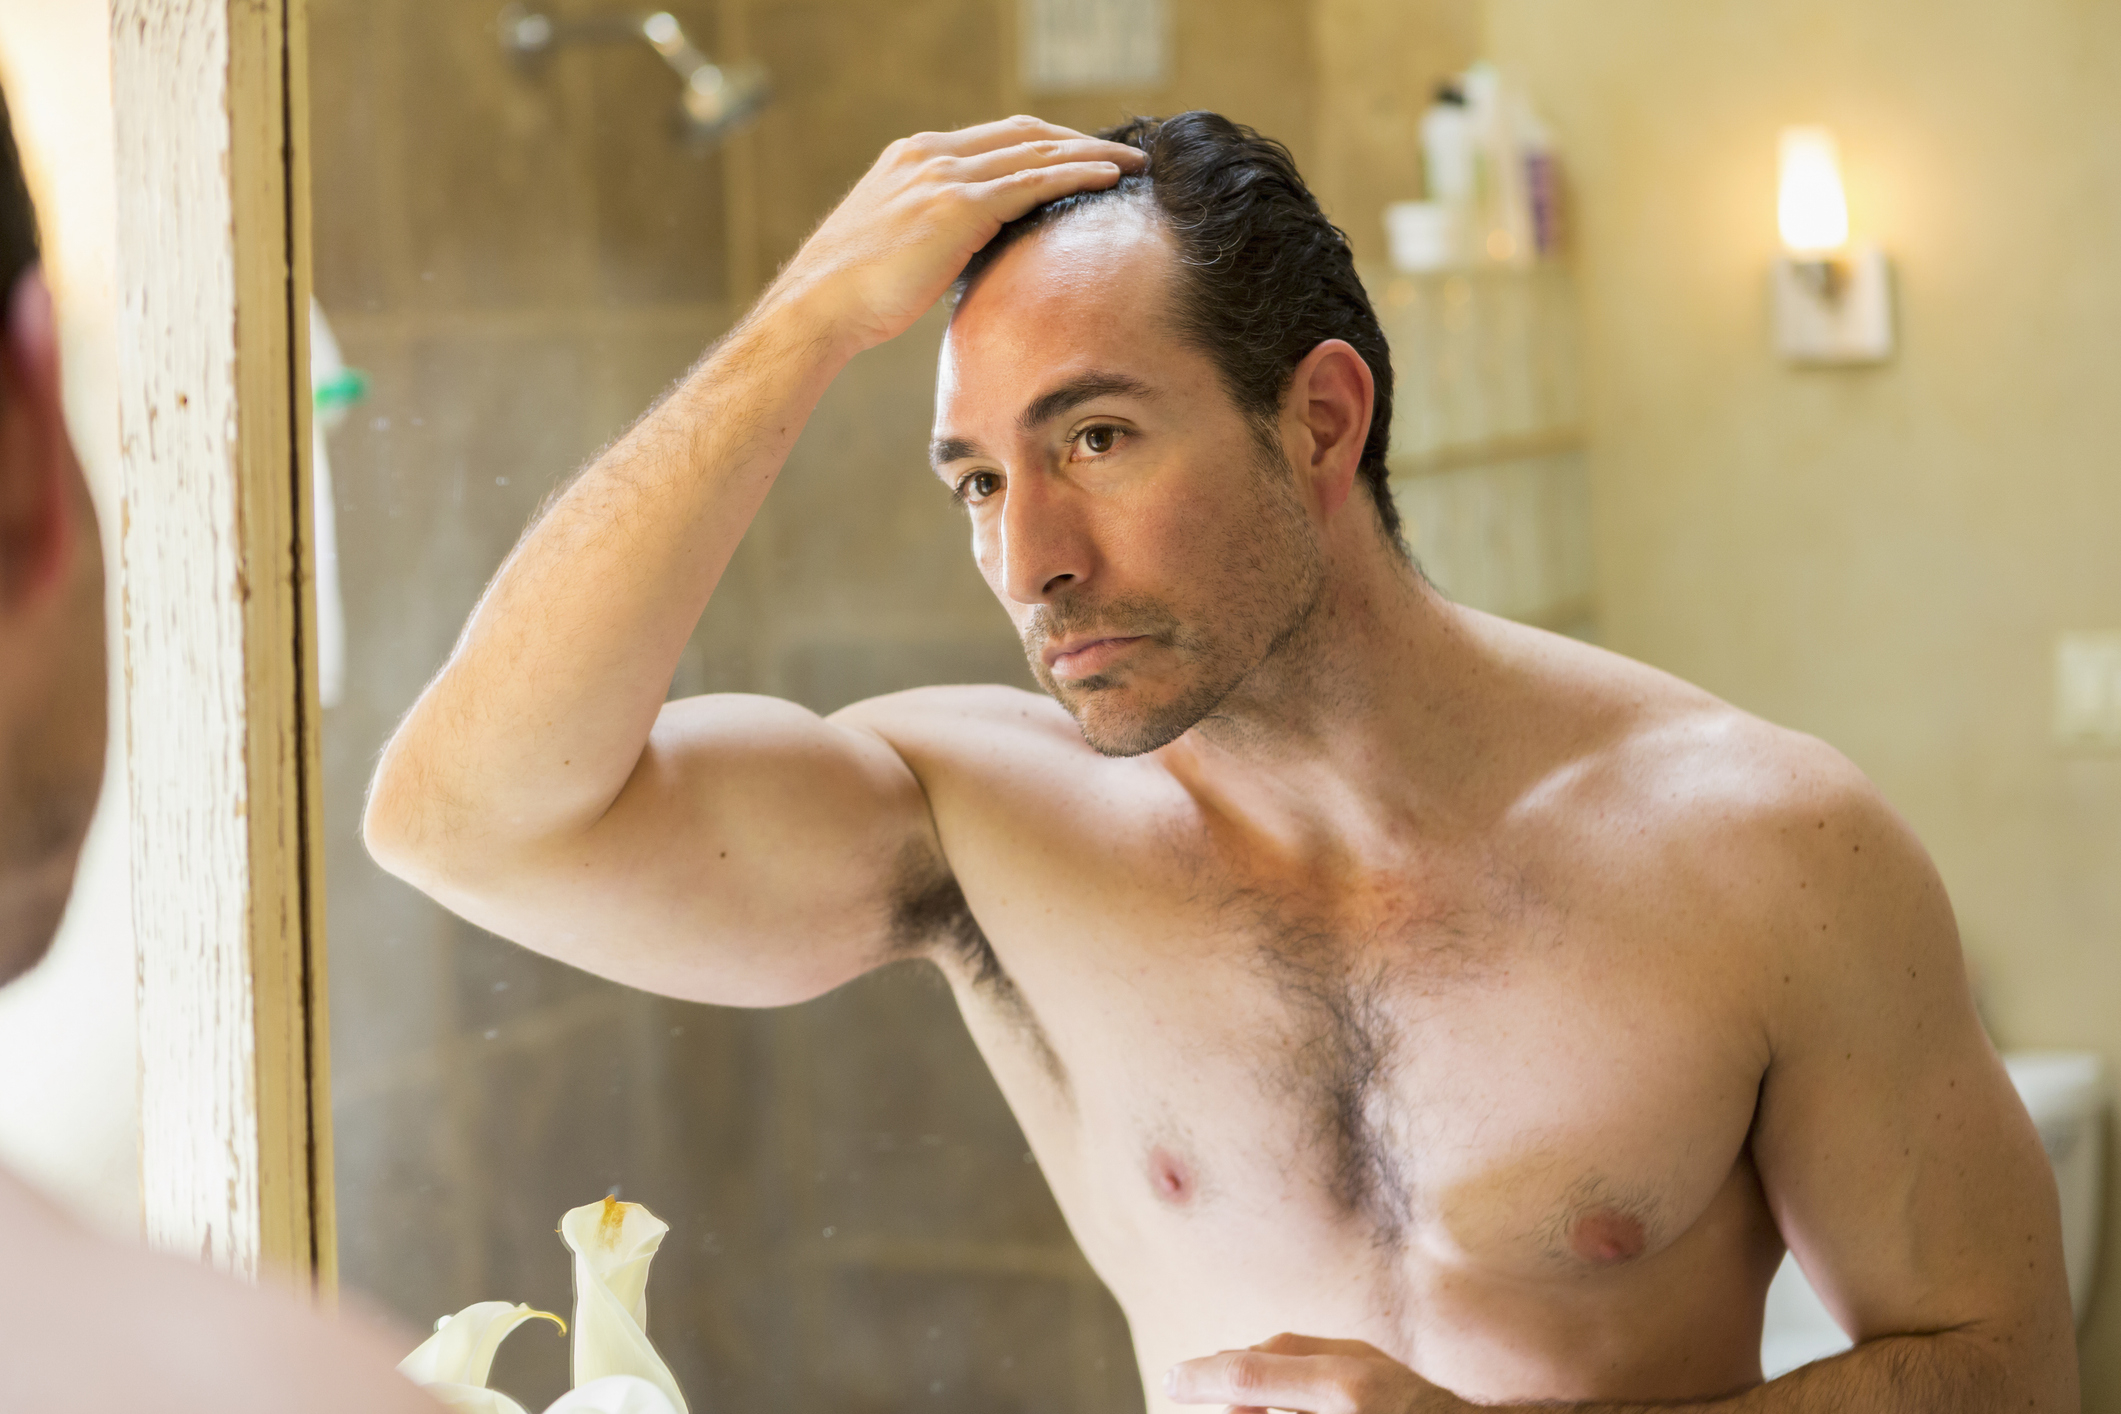 Man examining his hairline in the mirror, concerned expression, in a bathroom setting